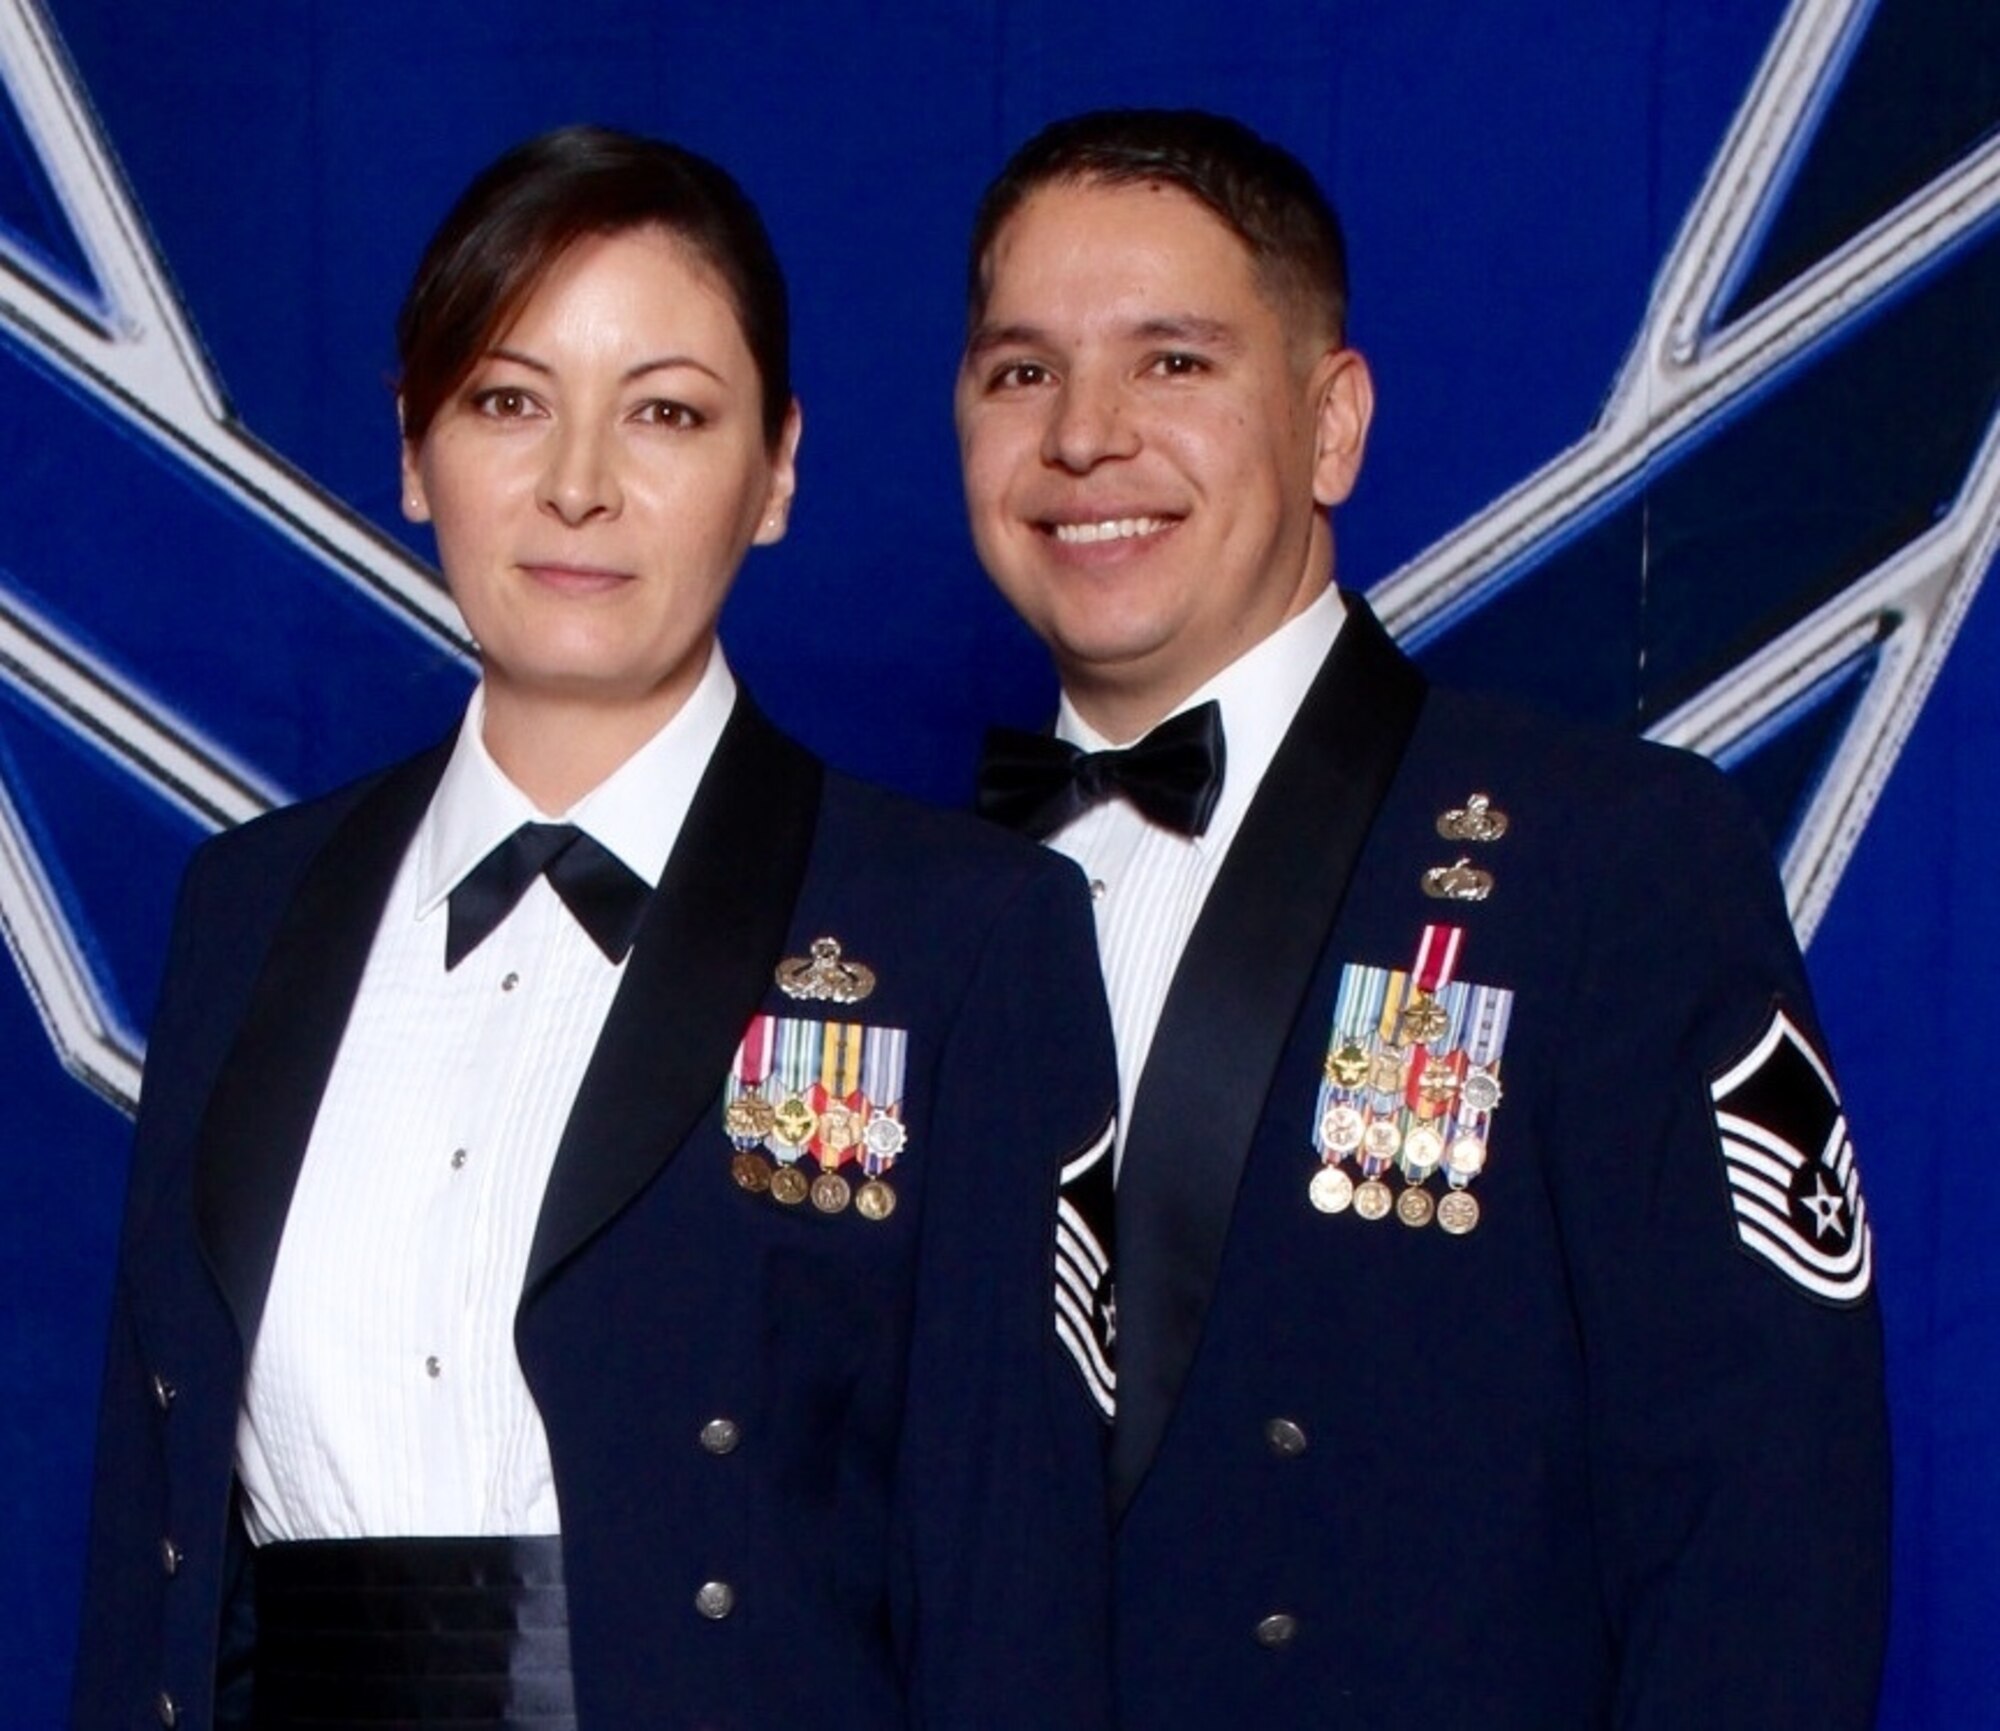 Master Sgts. Angela and Phillip Sisneros pose for a photo at the 2014 Air Force Ball in Las Vegas, Sept. 27, 2014. The couple was married on Aug. 1, 2011, but Phil was in a motorcycle accident 12 days later that would lead to his eventual medical retirement in 2014. (Courtesy photo)